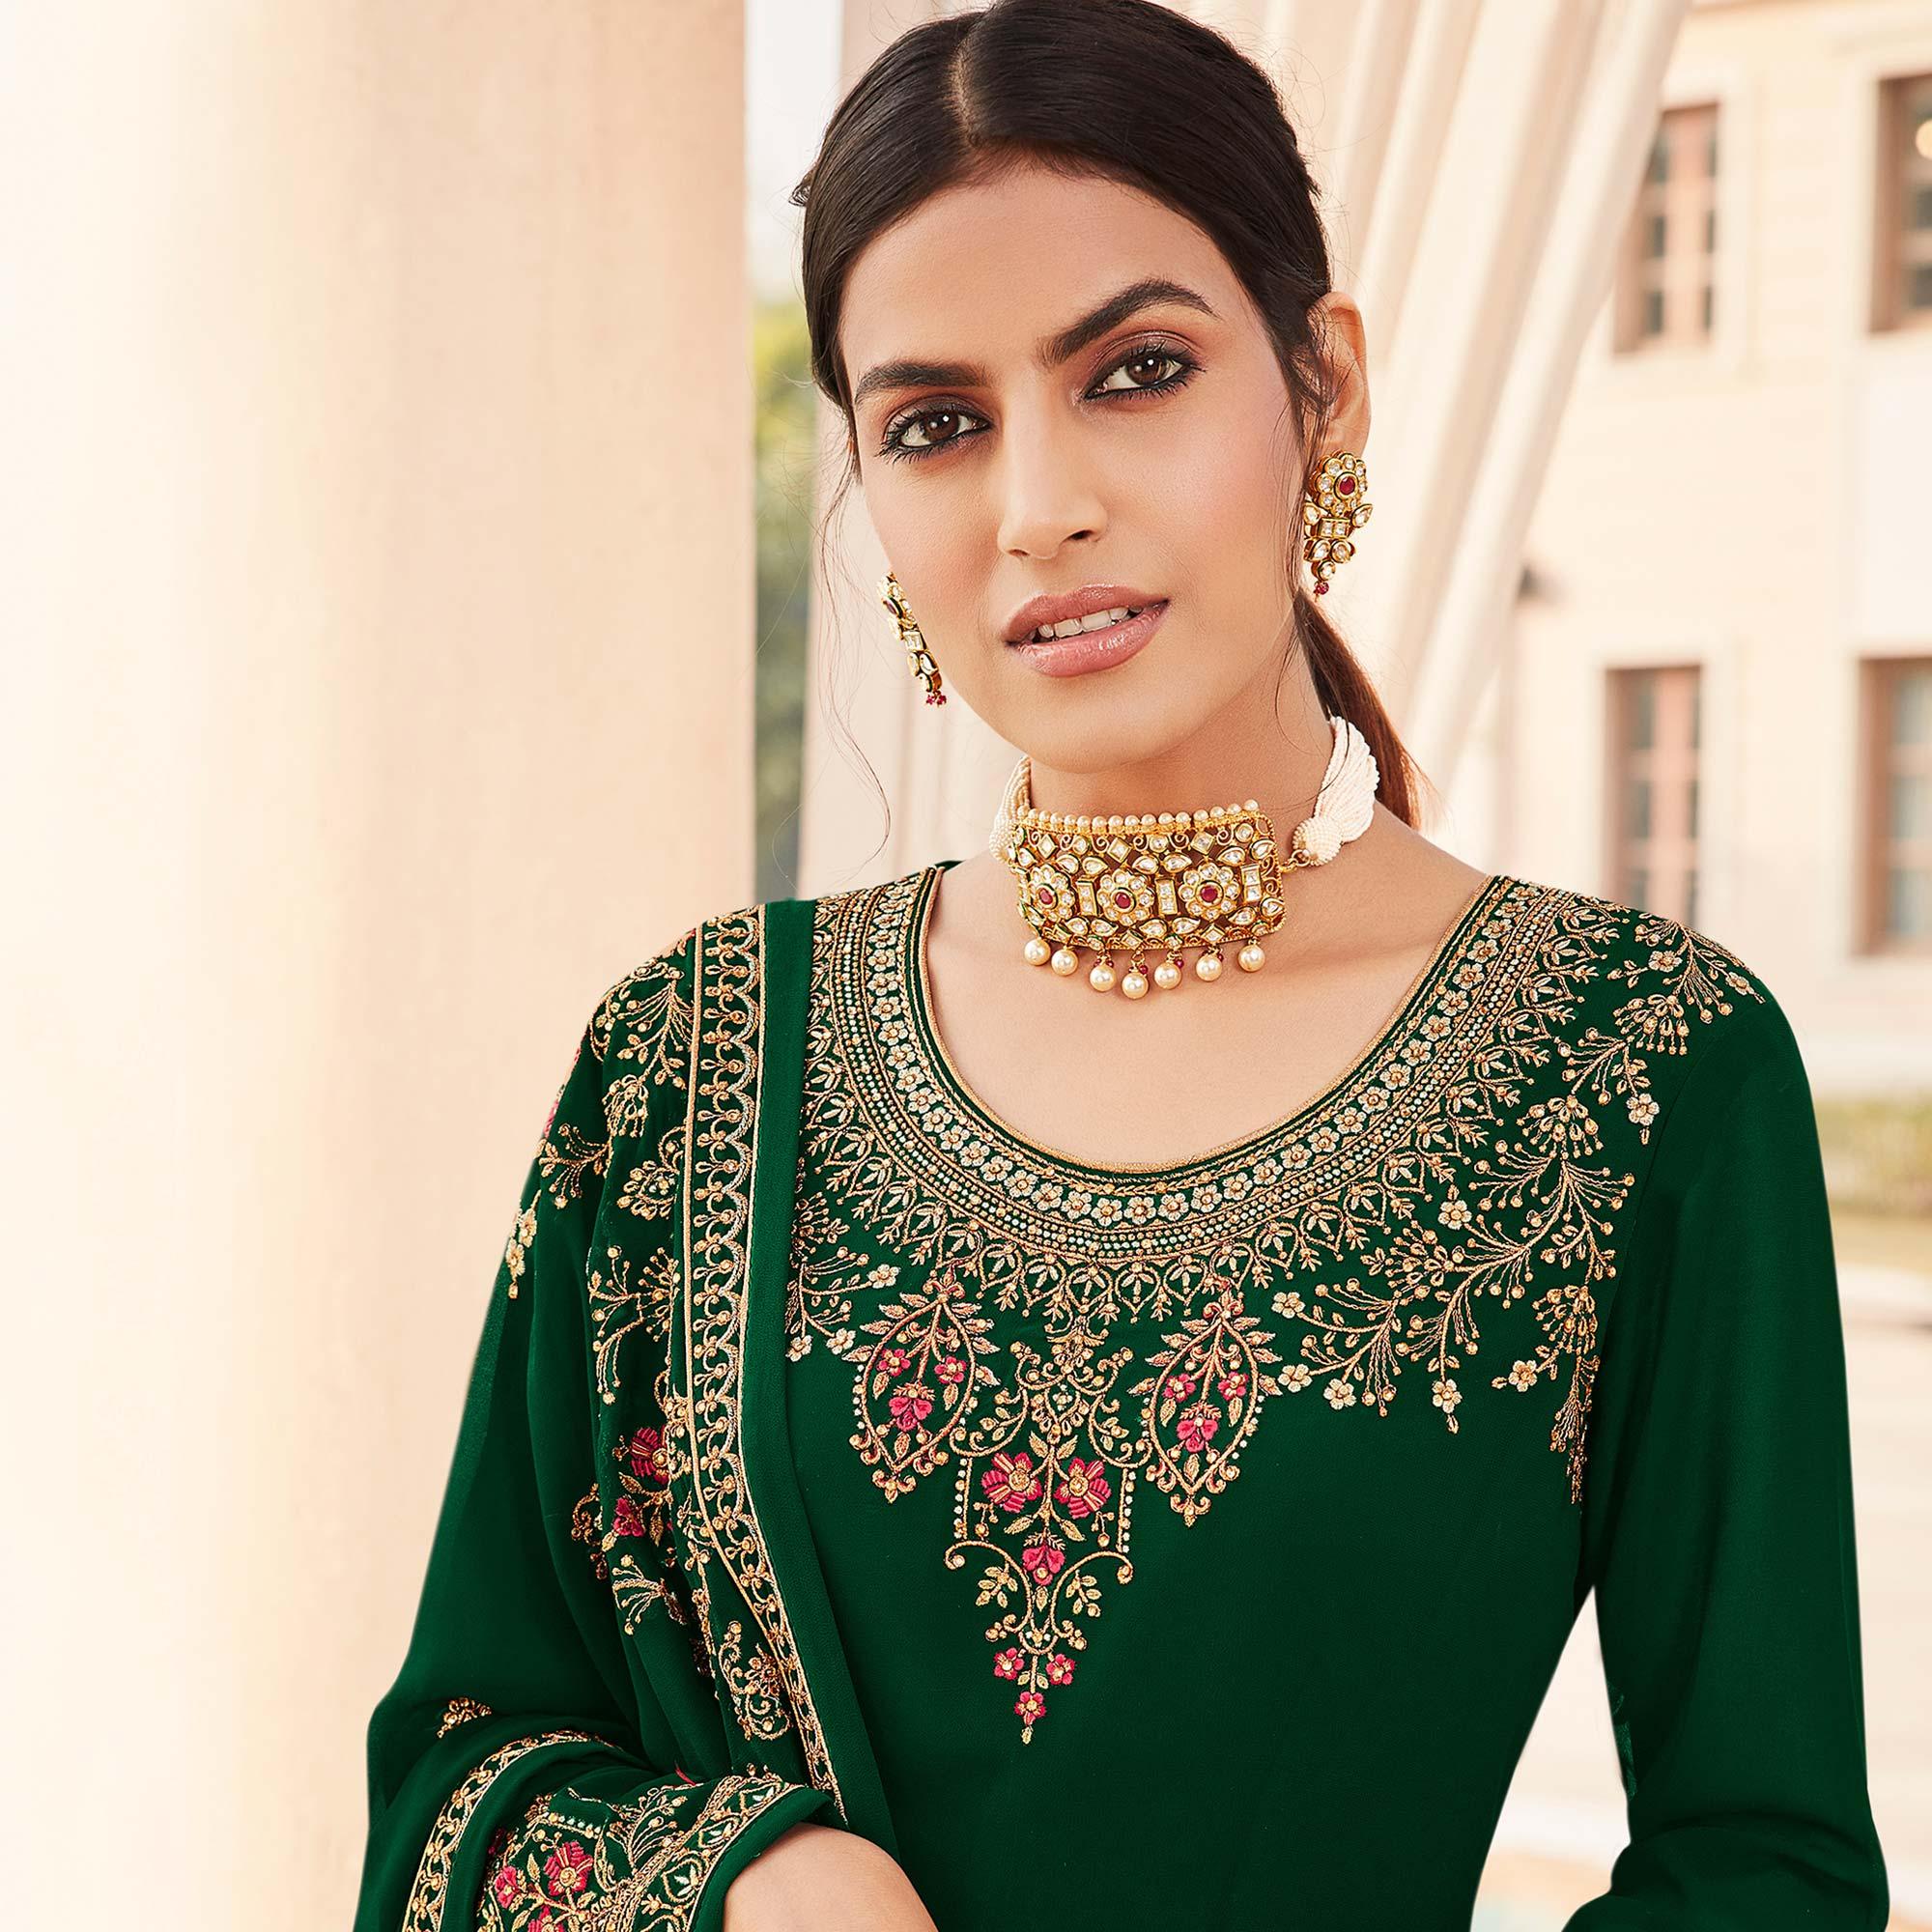 Pleasant Green Coloured Party Wear Embroidered Stone Work Faux Georgette Salwar Suit - Peachmode